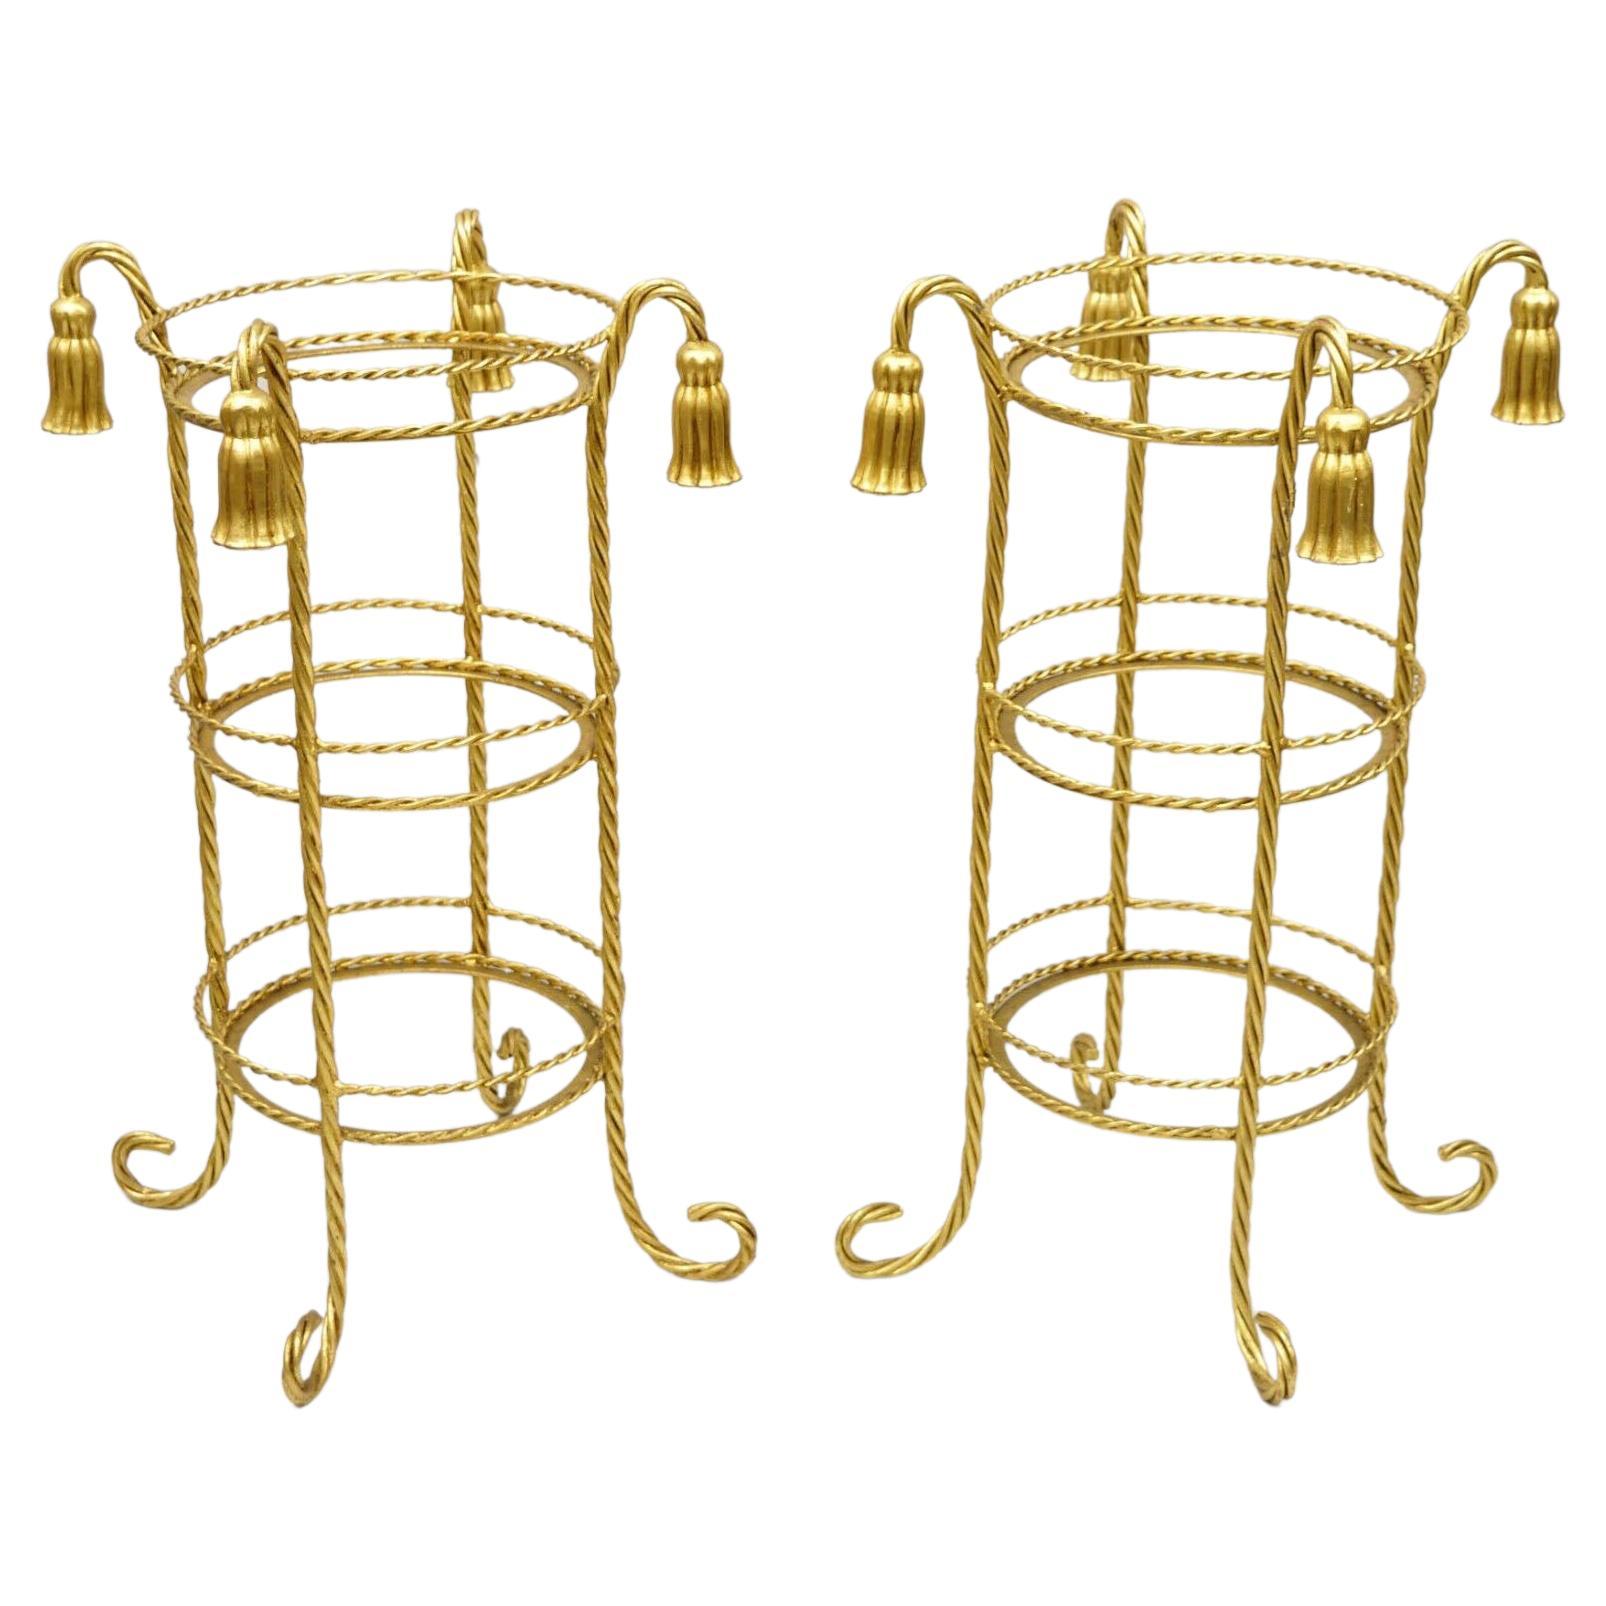 Italian Hollywood Regency 3 Tier Gold Iron Rope Tassel Stand Side Tables, Pair